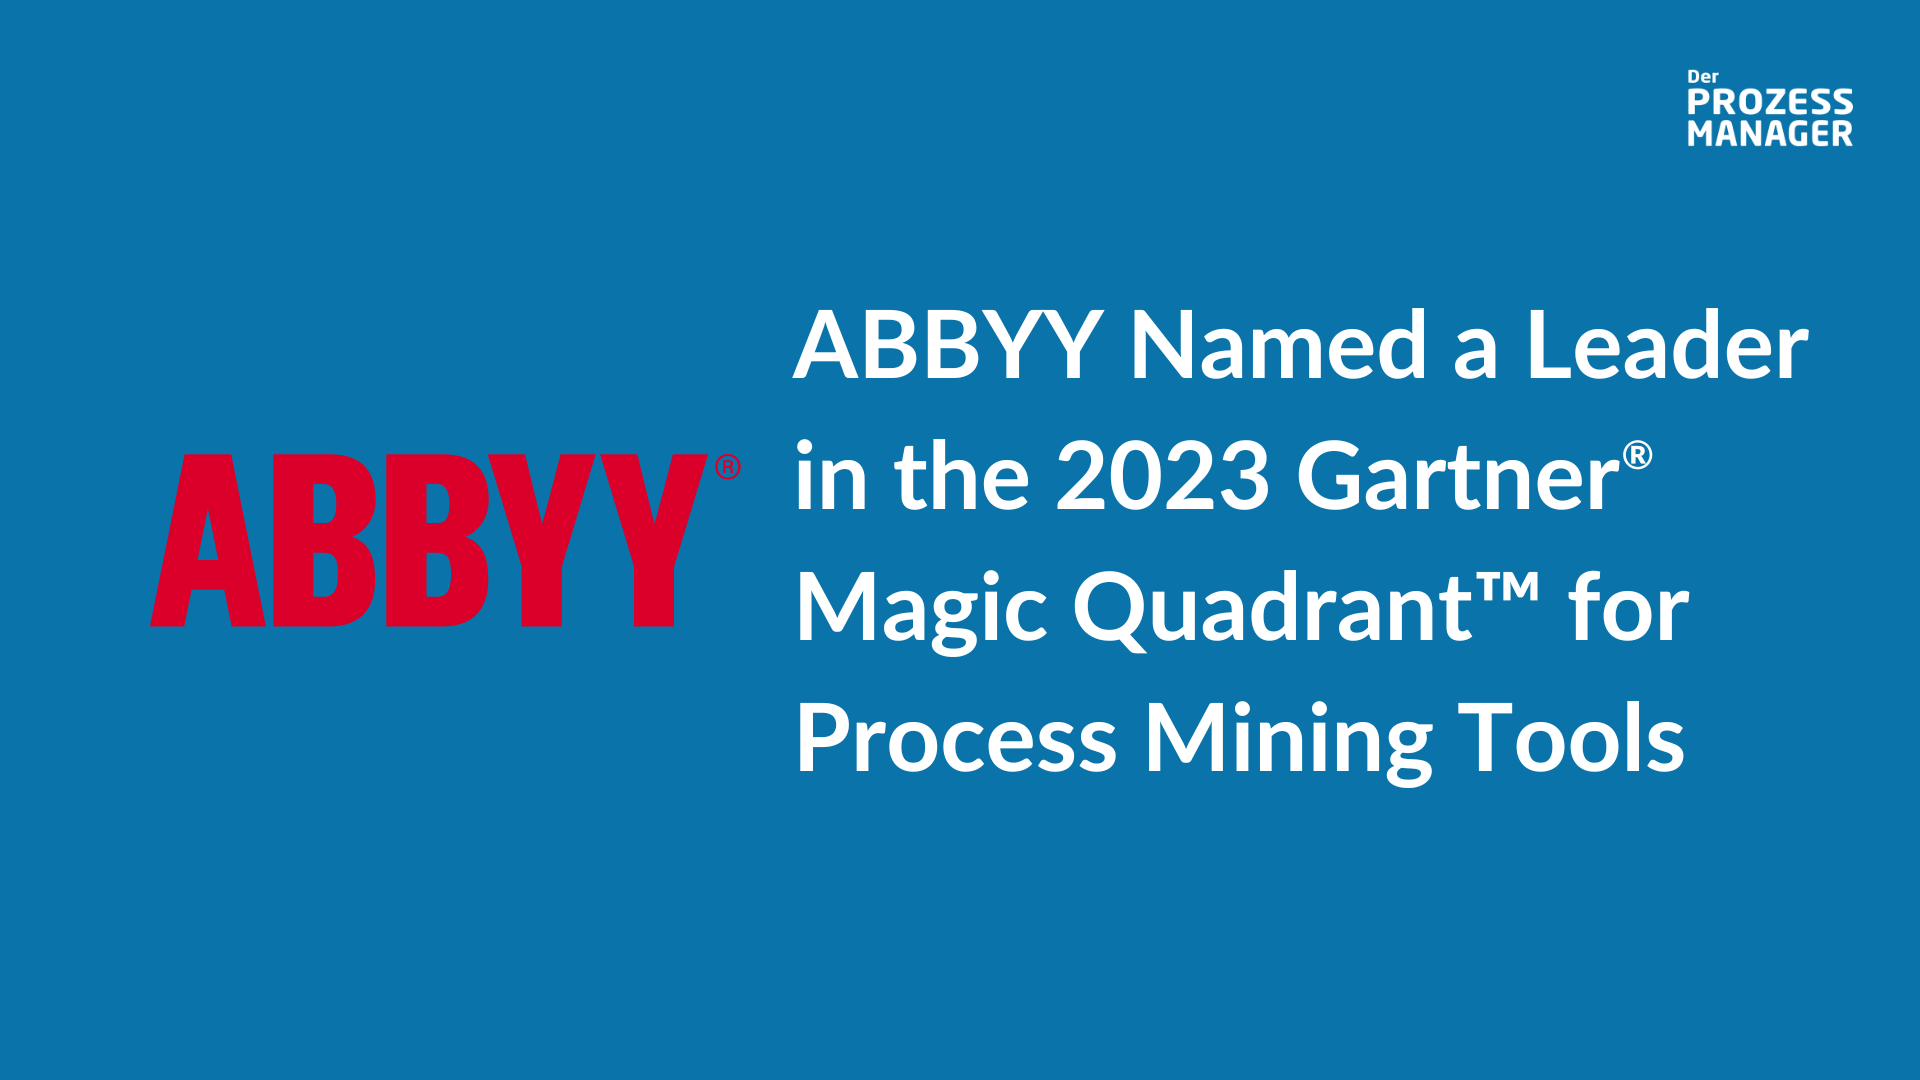 ABBYY Named a Leader in the 2023 Gartner® Magic Quadrant™ for Process Mining Tools